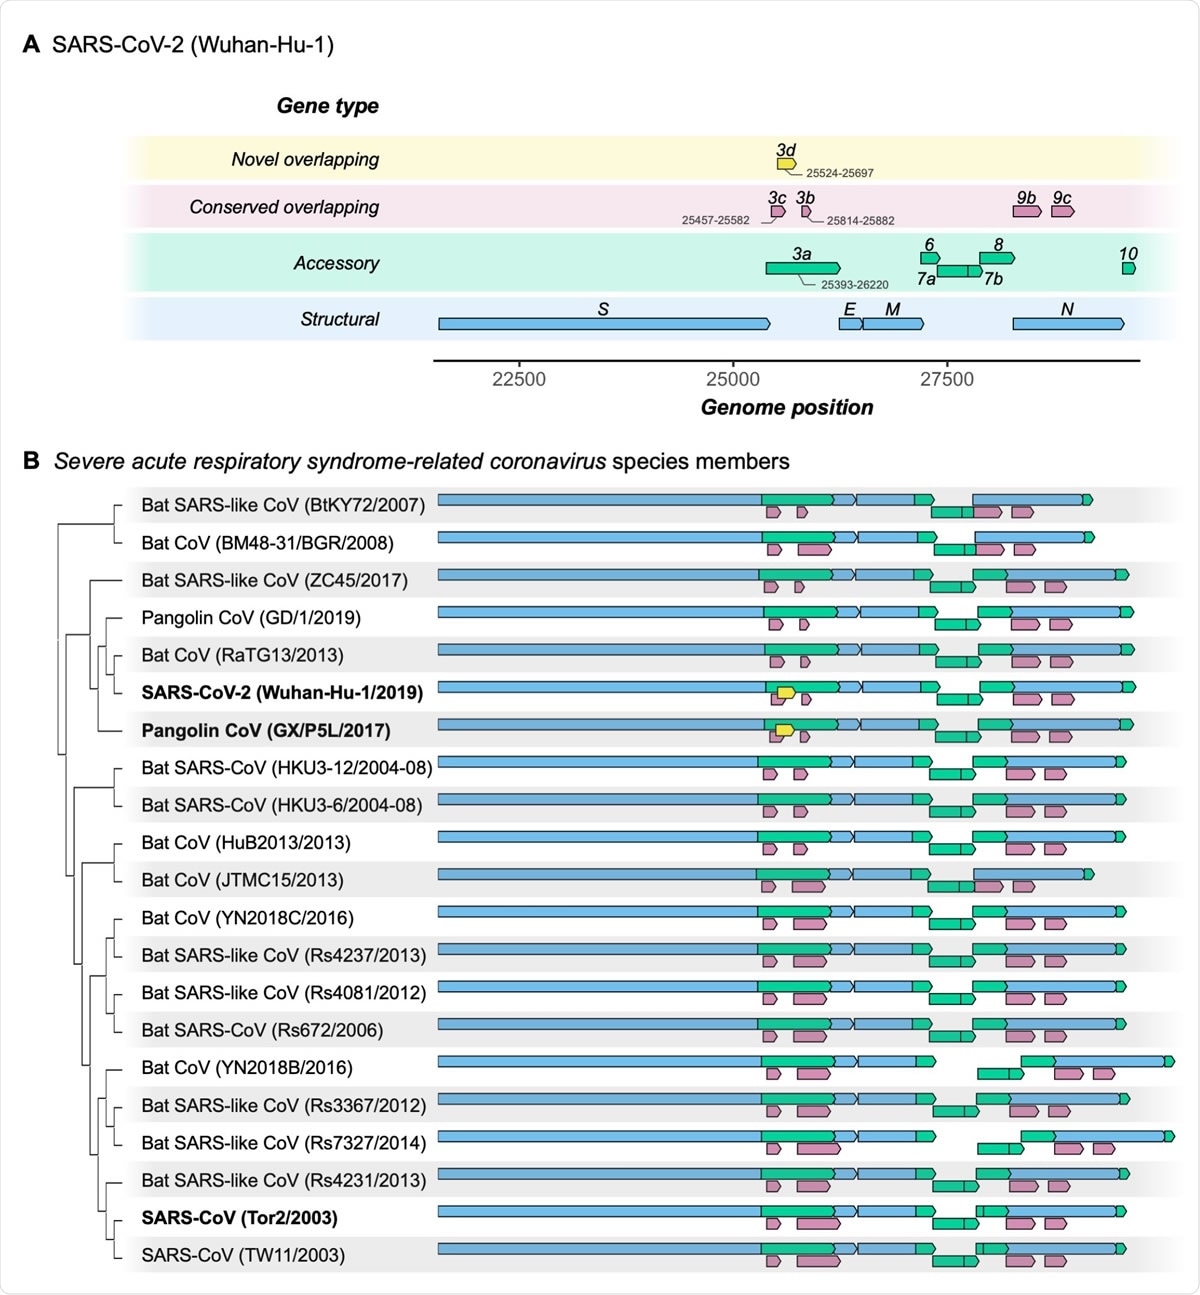 Gene repertoire and evolutionary relationships of Severe acute respiratory syndrome-related coronavirus species members. Only genes downstream of ORF1ab are shown, beginning with the Spike gene S. (A) Four types of genes and their relative positions in the SARS-CoV-2 Wuhan-Hu- 1 genome (NCBI: NC_045512.2). Genes are colored by type: novel overlapping genes (OLGs) (gold; ORF3d only); conserved OLGs (burgundy); accessory (green); and structural (blue). Note that ORF3b has been truncated relative to SARS-CoV genomes, whereas ORF8 remains intact (i.e. has not been split into ORF8a and ORF8b). (B) Genes with intact ORFs in each of 21 Severe acute respiratory syndrome-related coronavirus genomes. Gene positions are shown relative to each genome, i.e. homologous genes are not precisely aligned.